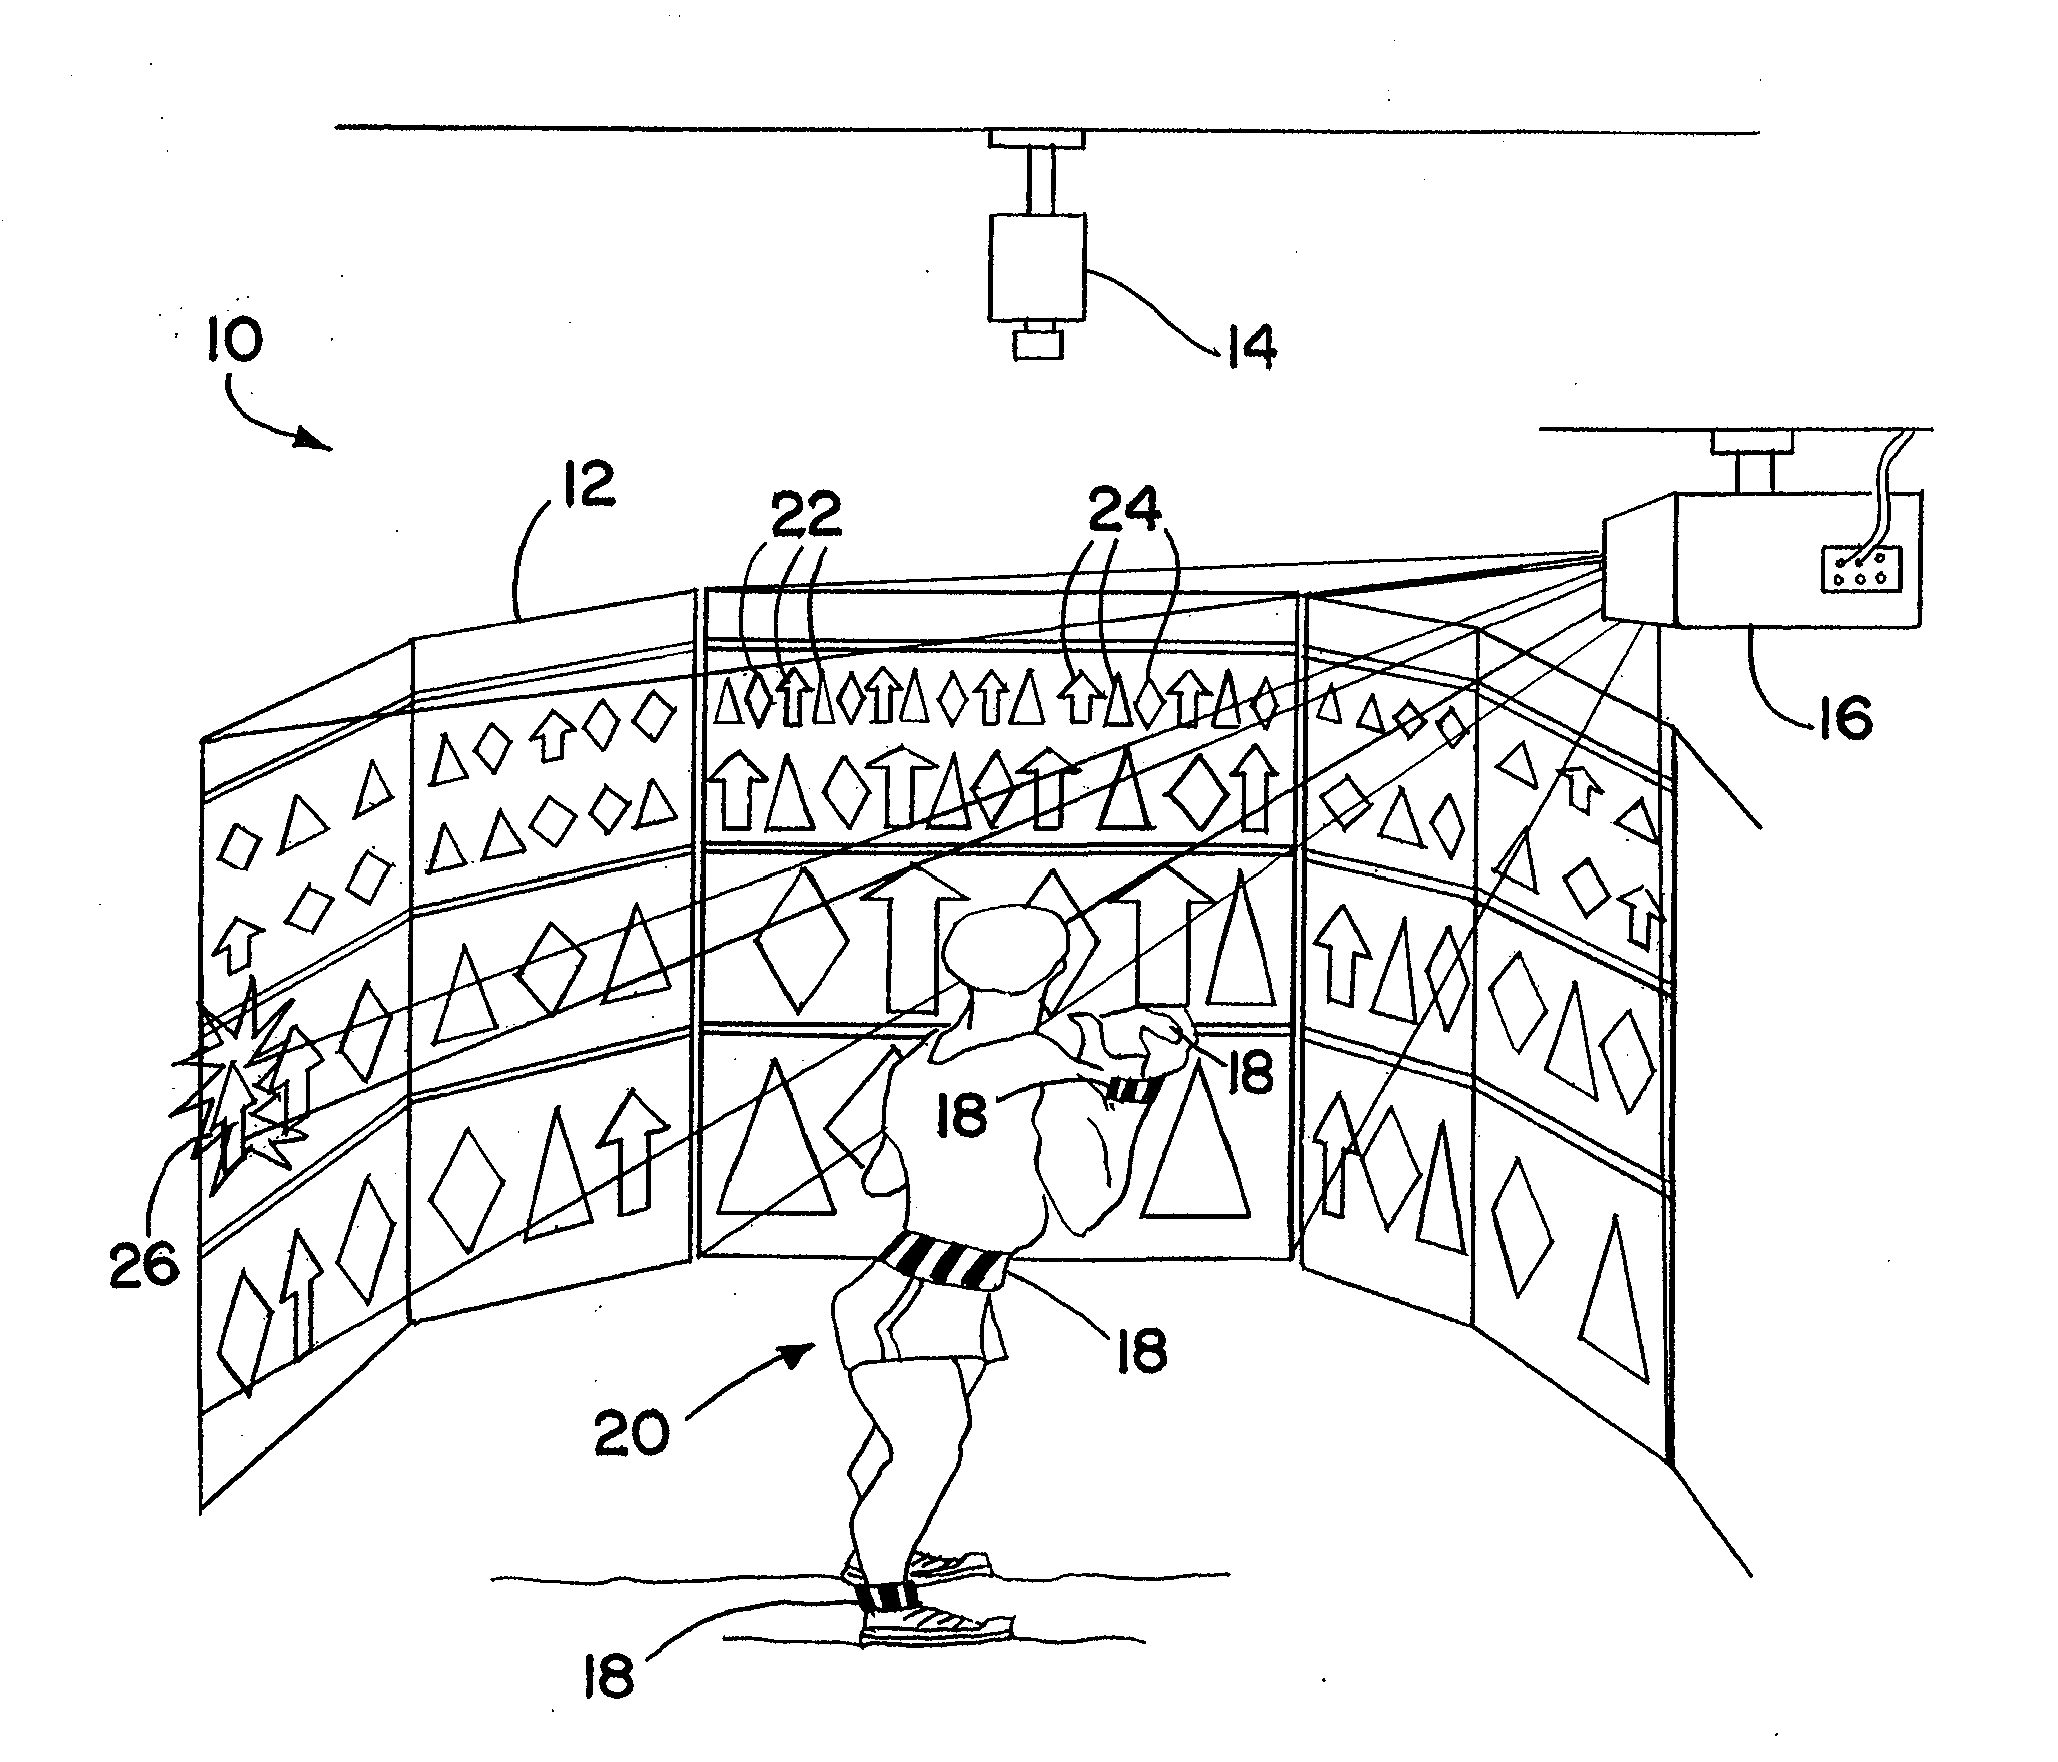 Reaction training apparatus and methods of use